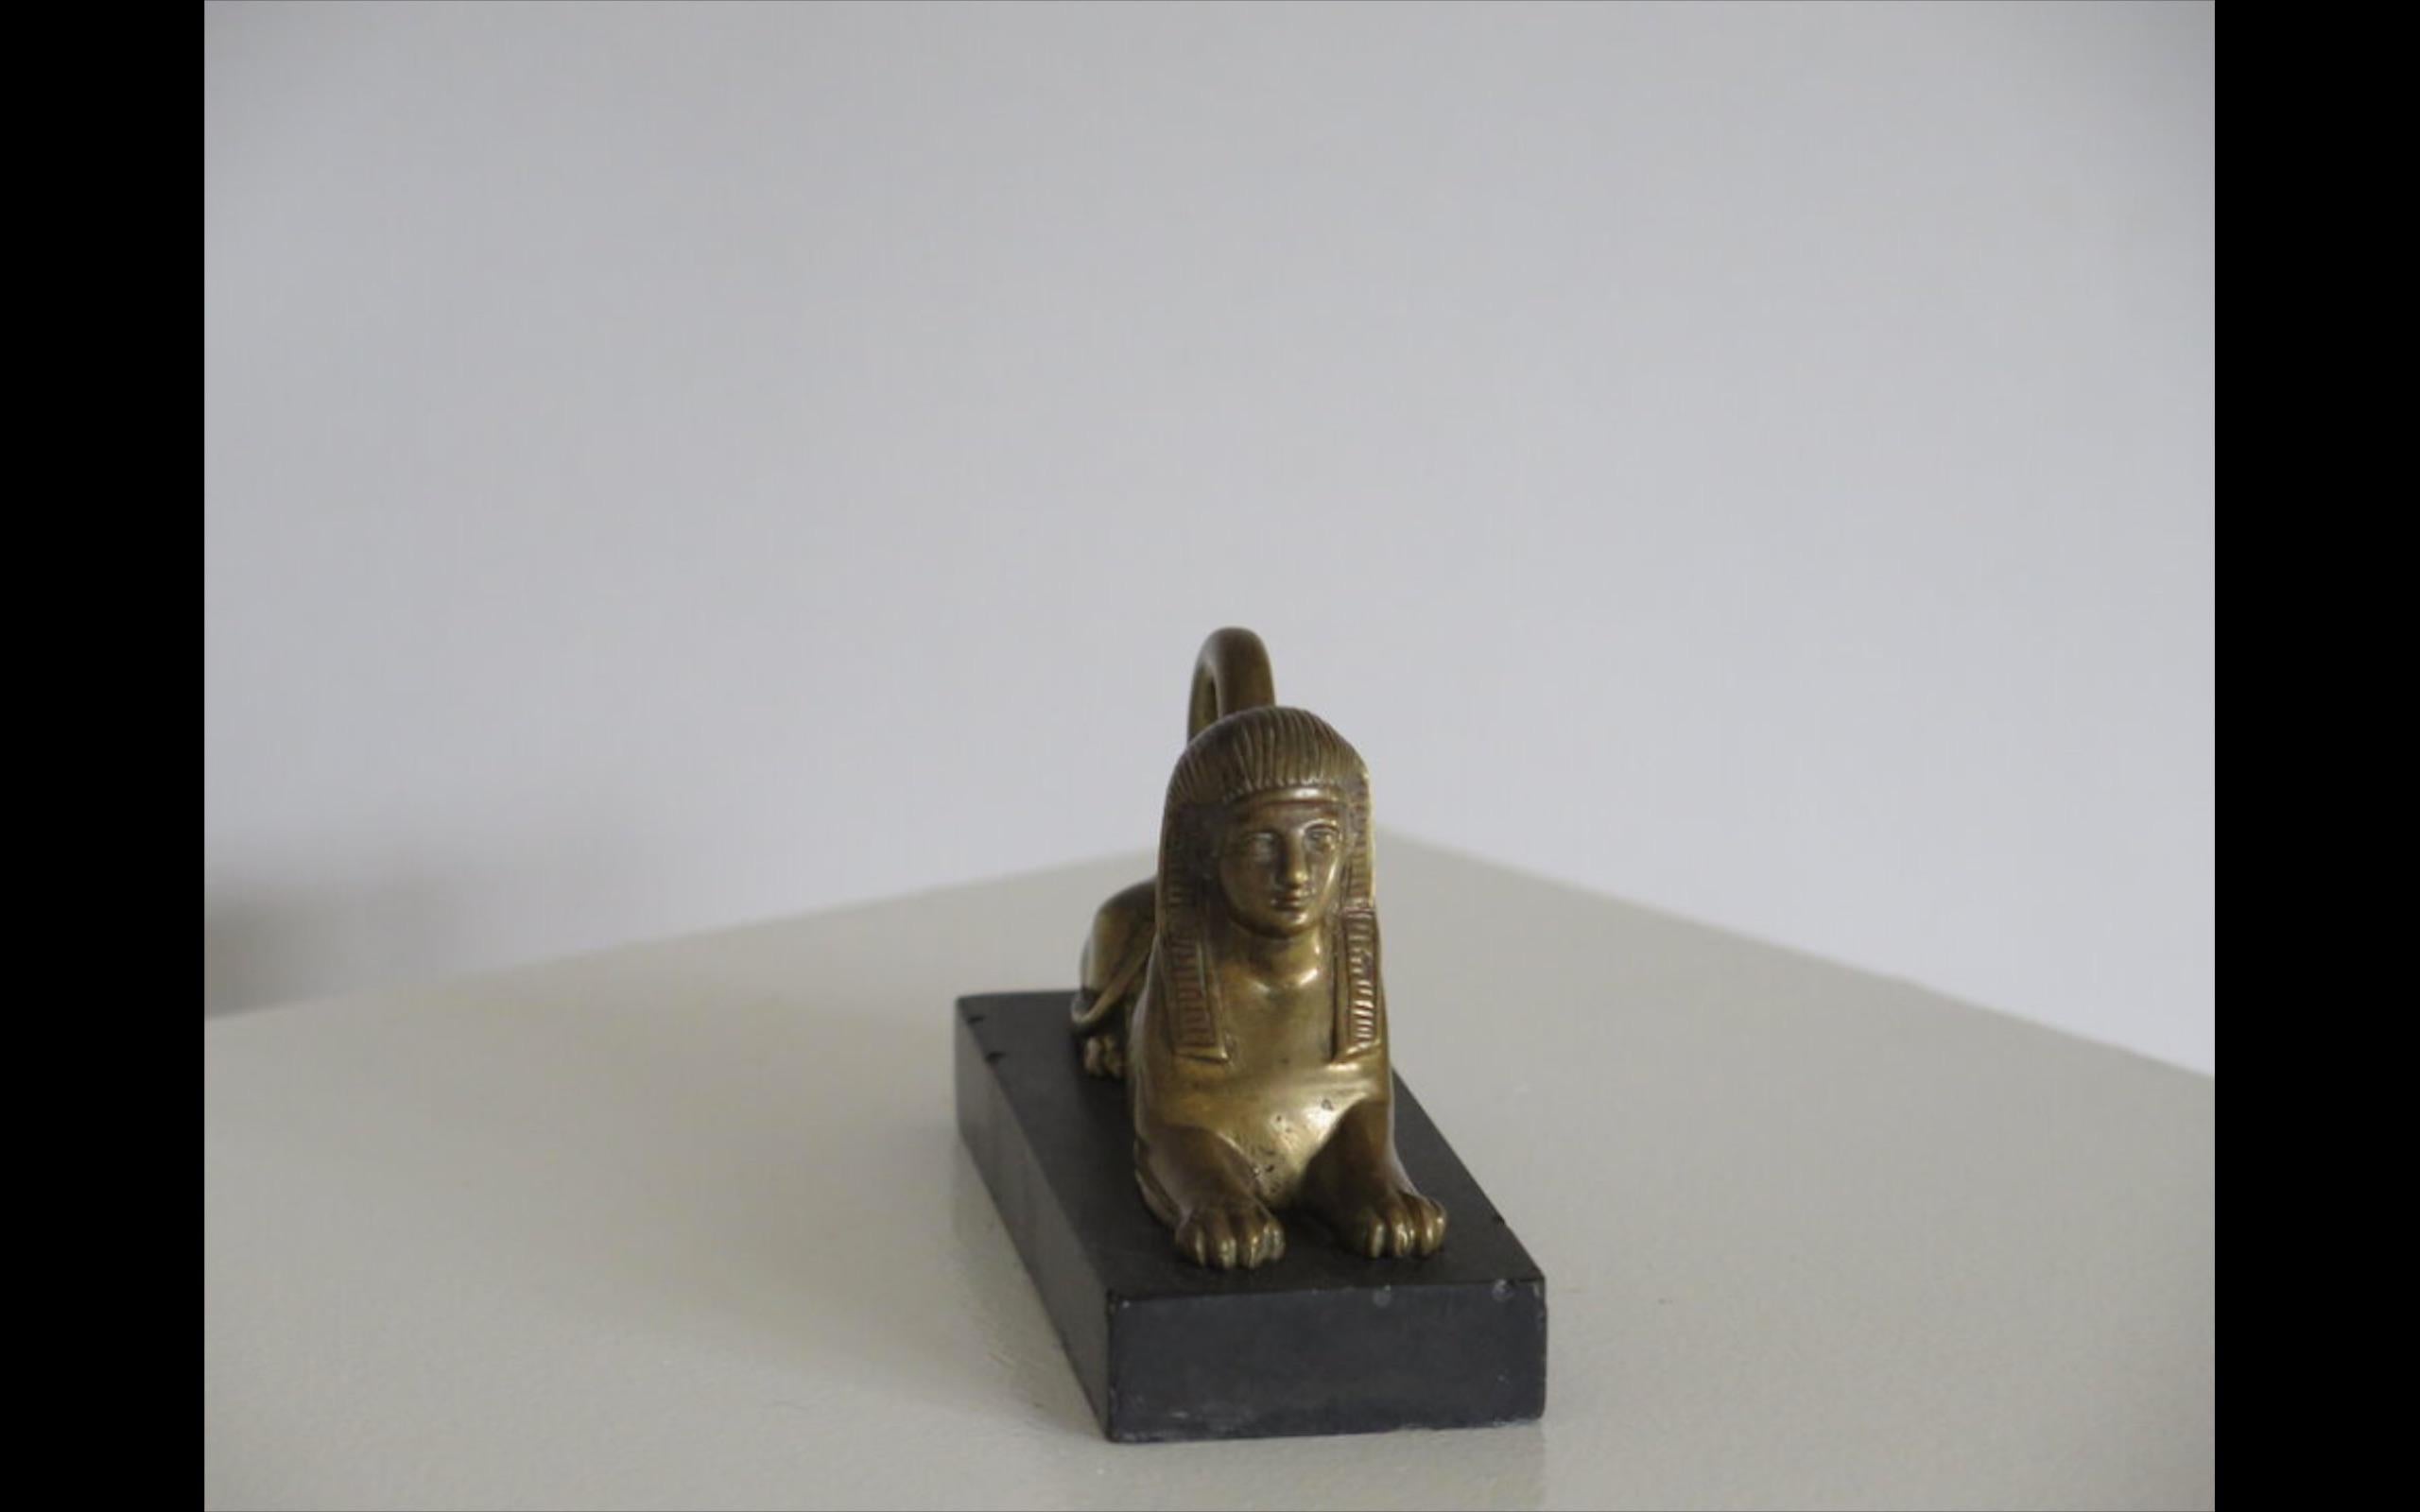 Grand Tour Statue of a Sphinx in Brass or Bronze on Black Marble Base. England, circa 1930. A beautiful piece dating from the 1930s when Egyptomania and Egyptian Revival decoration took over England and Europe.